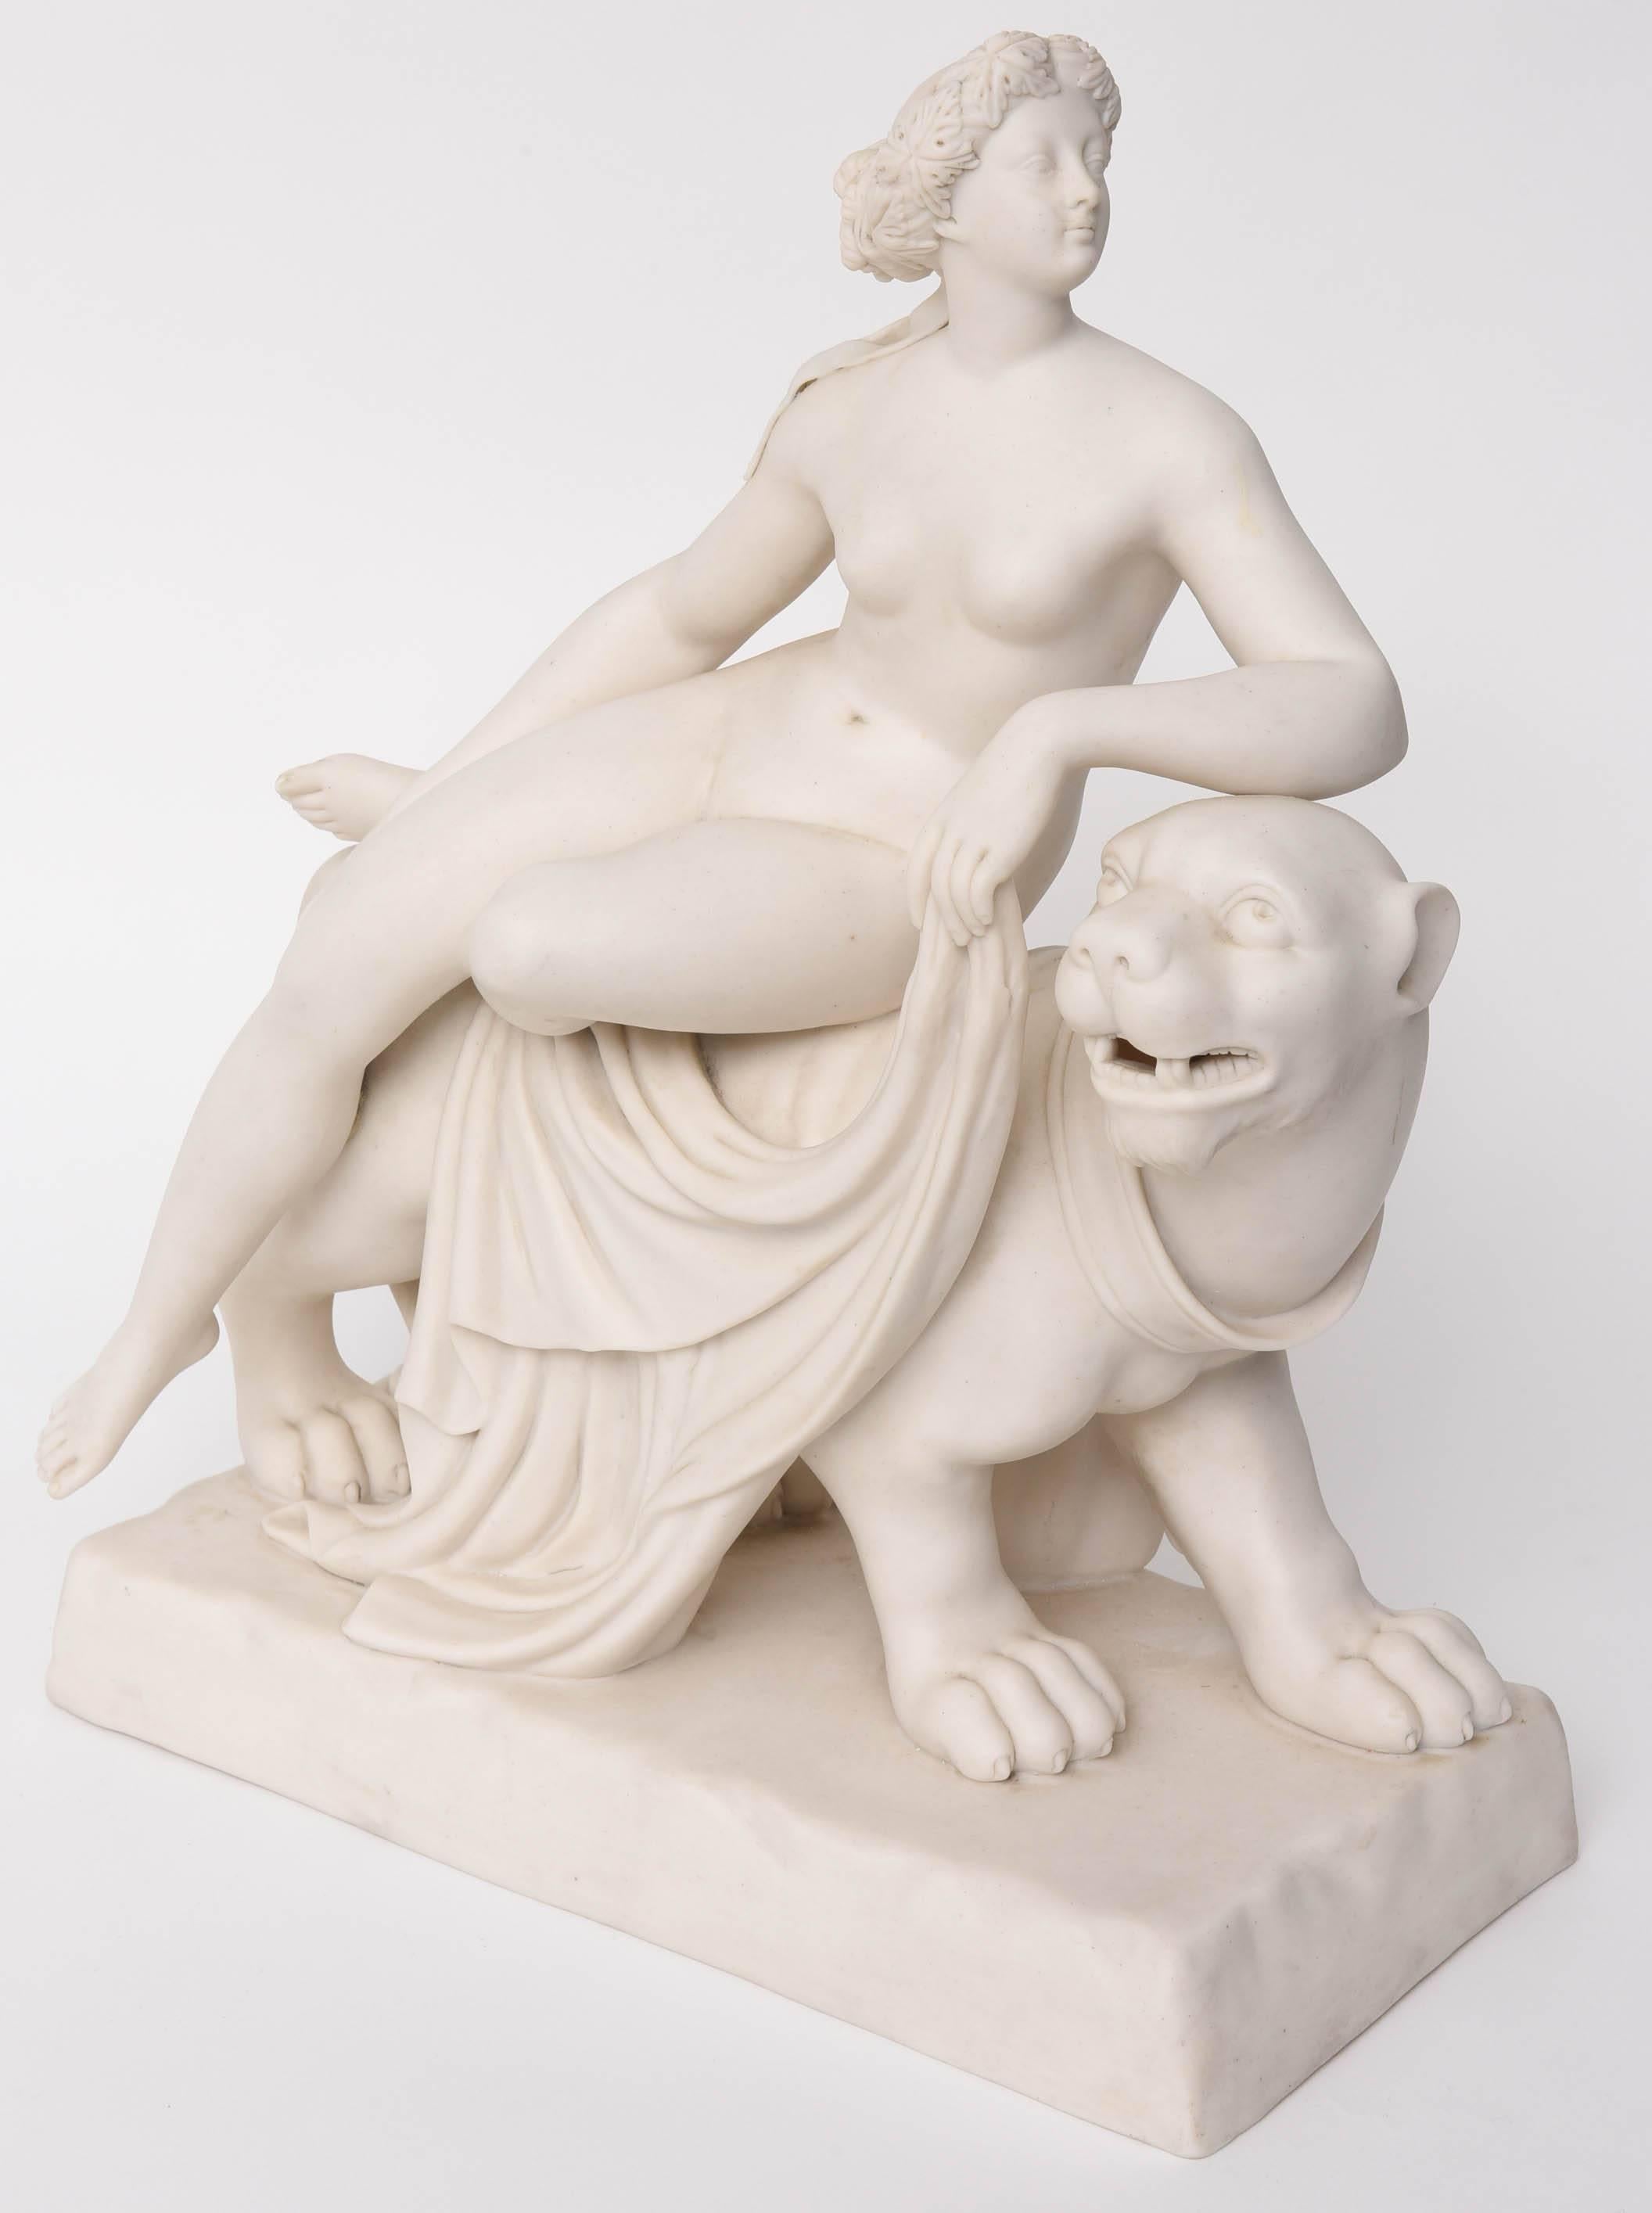 Minton Group 'Ariadne on a Panther' a Parian-ware figure of Ariadne reclining nude on the back of a stylized panther, moving towards the right; she wears an acanthus wreath on her head, her left leg tucked beneath her right, holding drapery in her